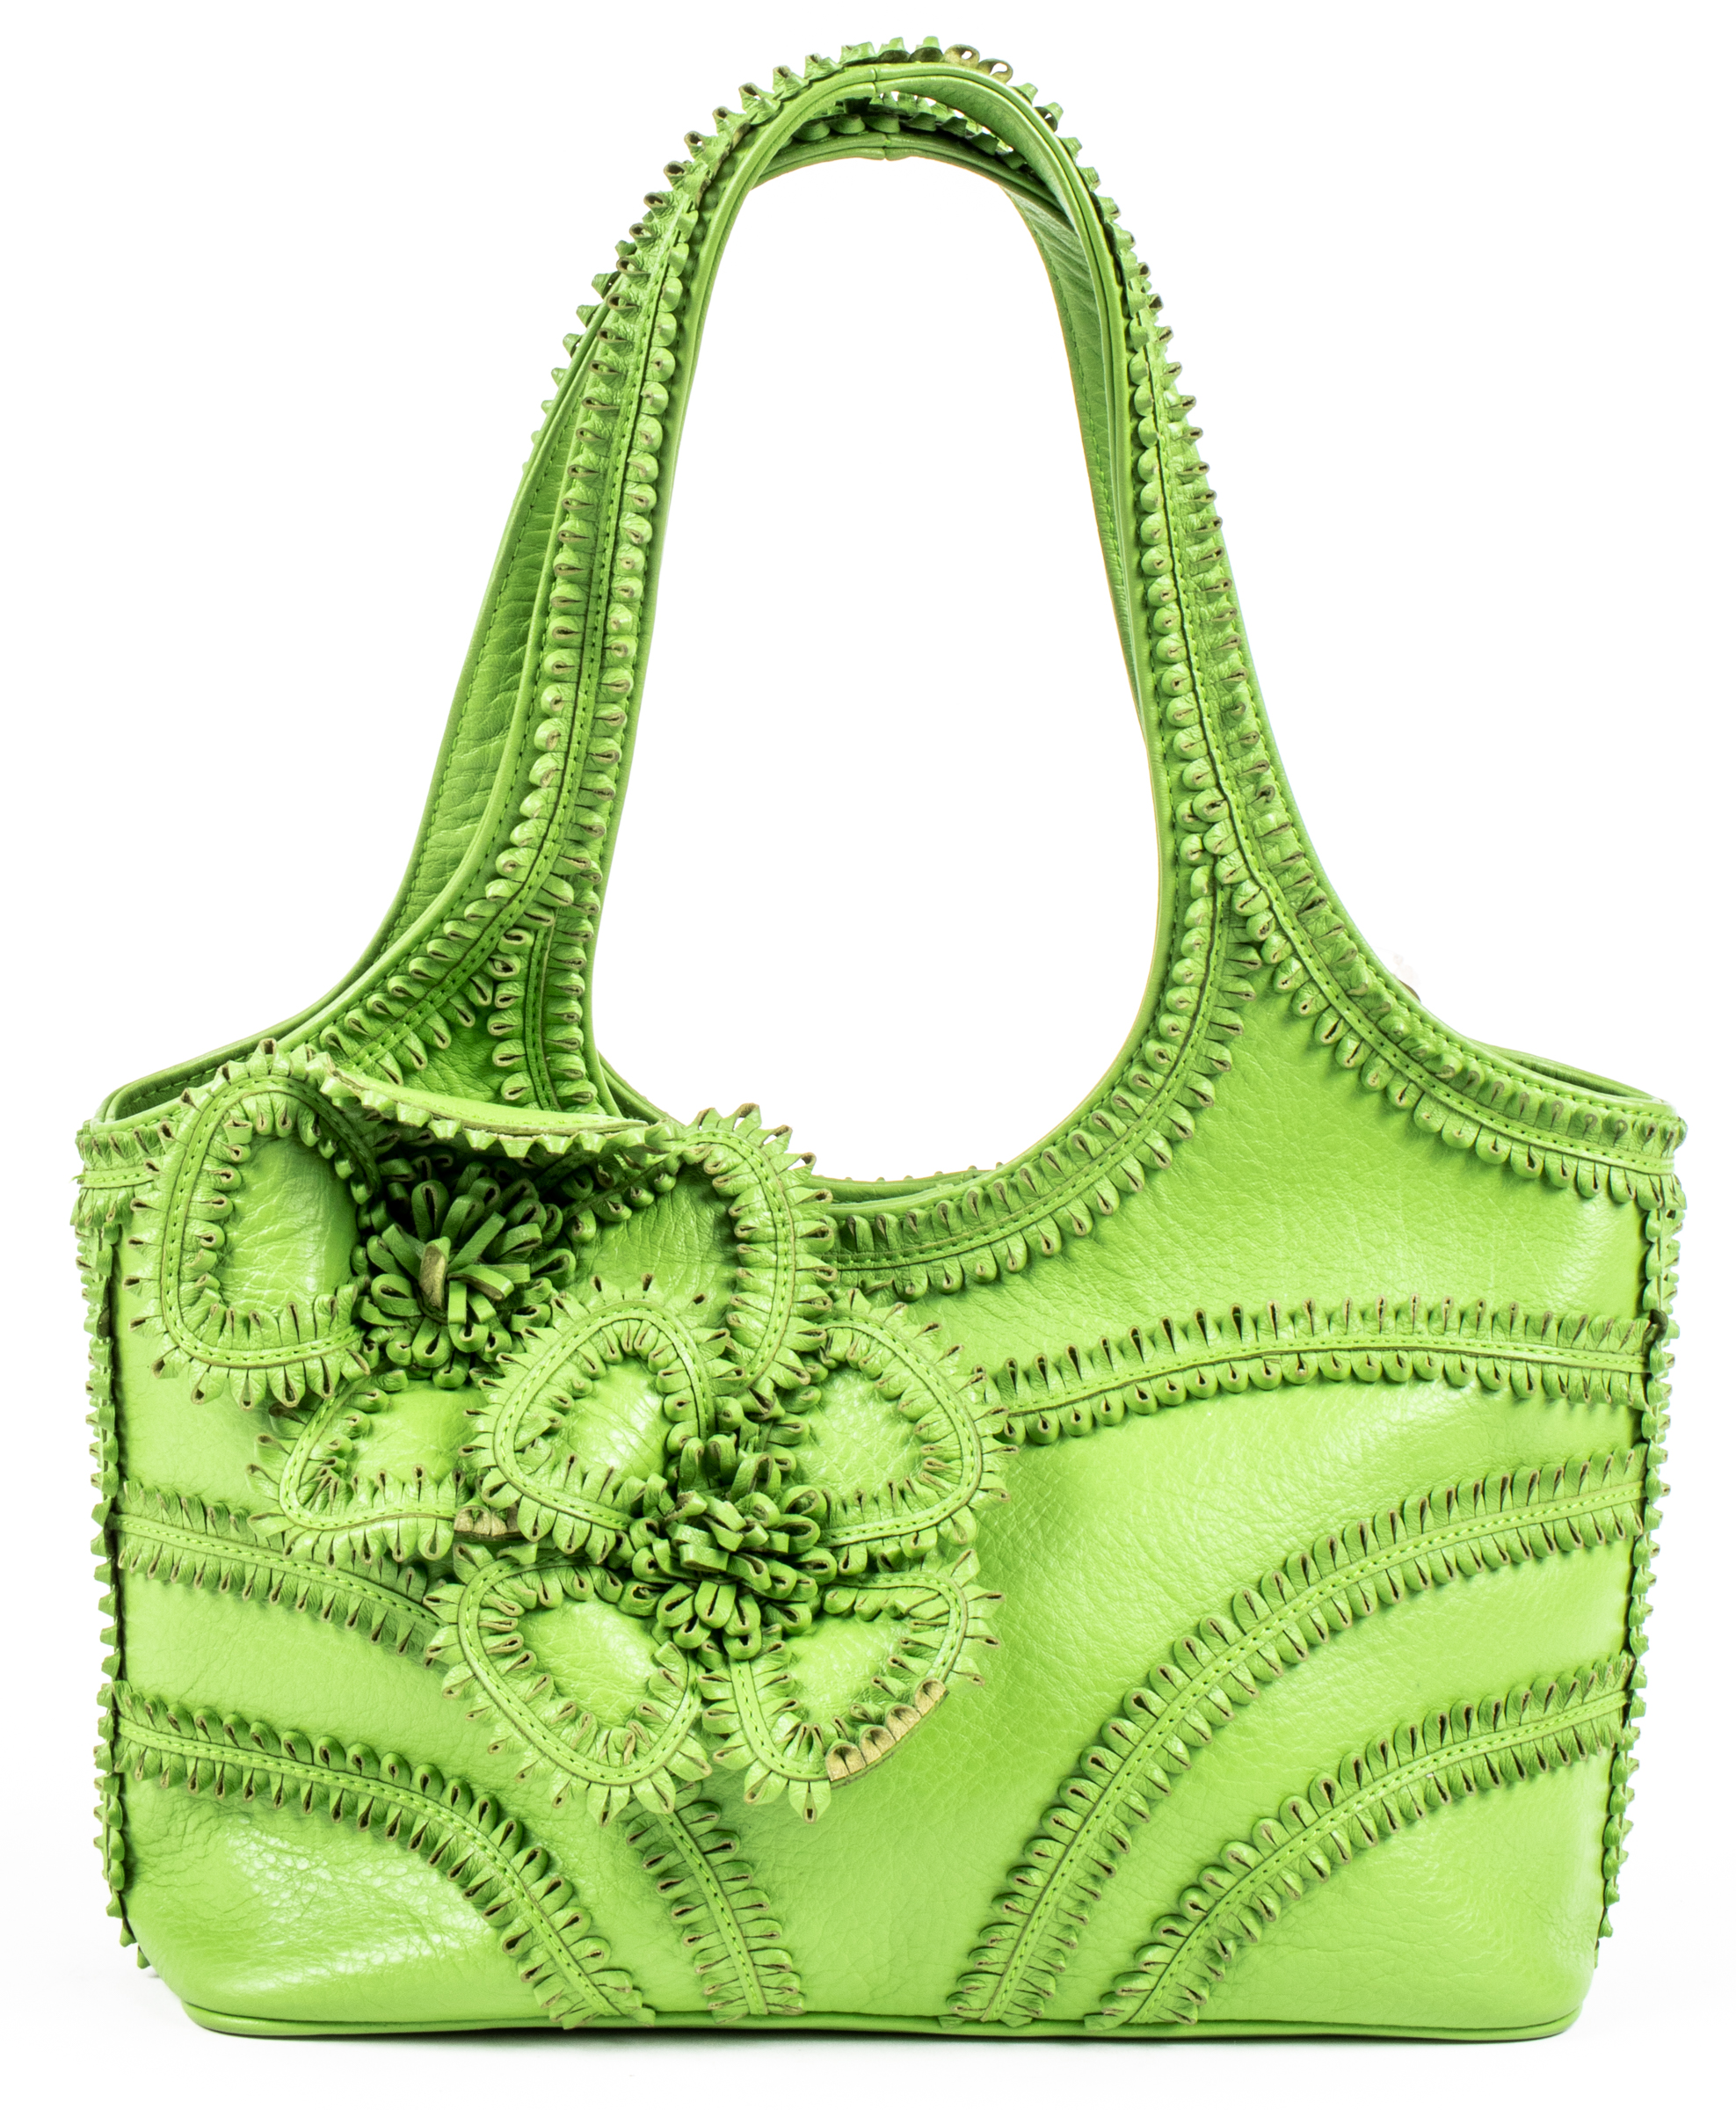 ISABELLA FIORE GREEN LEATHER FLORAL 3c37ce